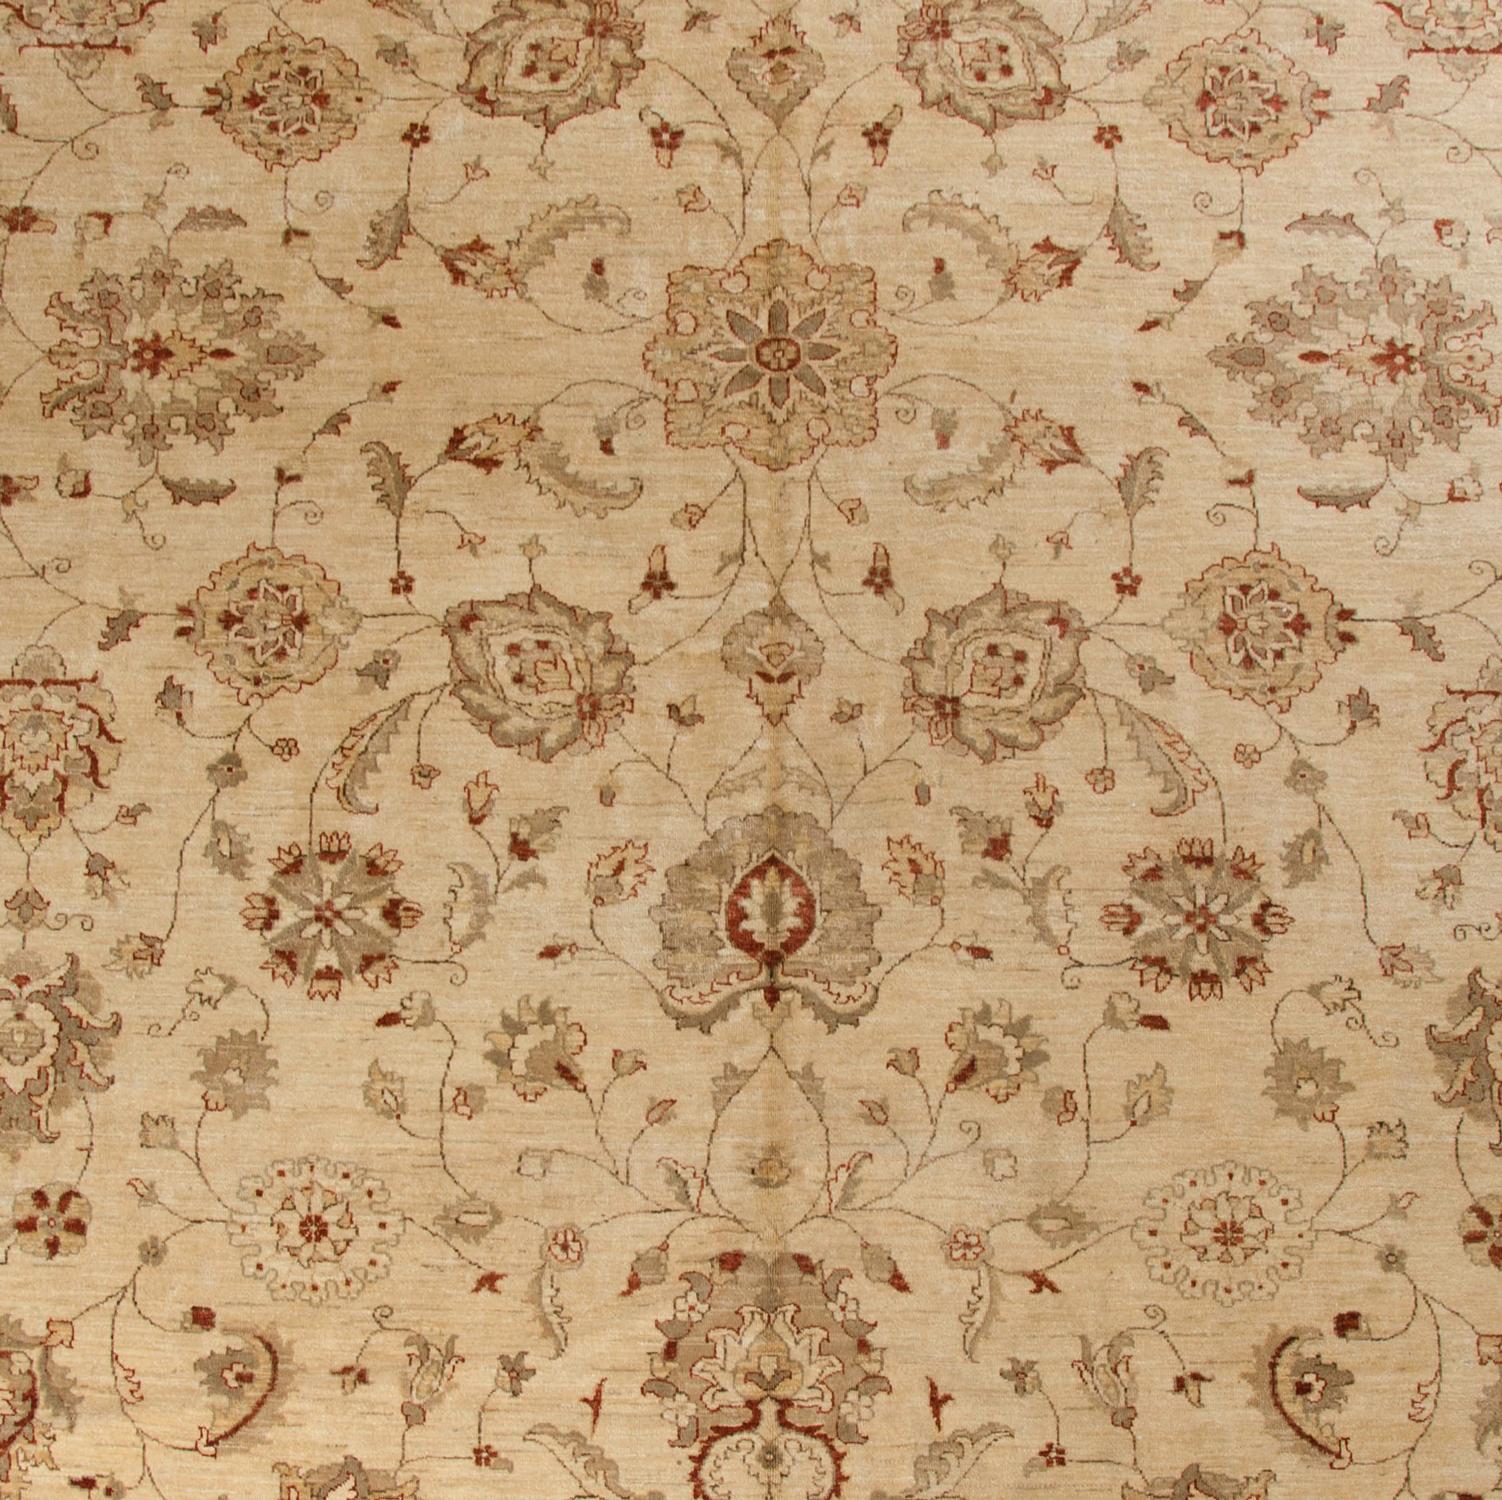 This fantastic Ziegler carpet is an extra-large area rug with a fantastic traditional repeat pattern design. Featuring an excellent floral motif design that has been woven in rich red tones on a beige/cream field. The border is a beautiful repeat